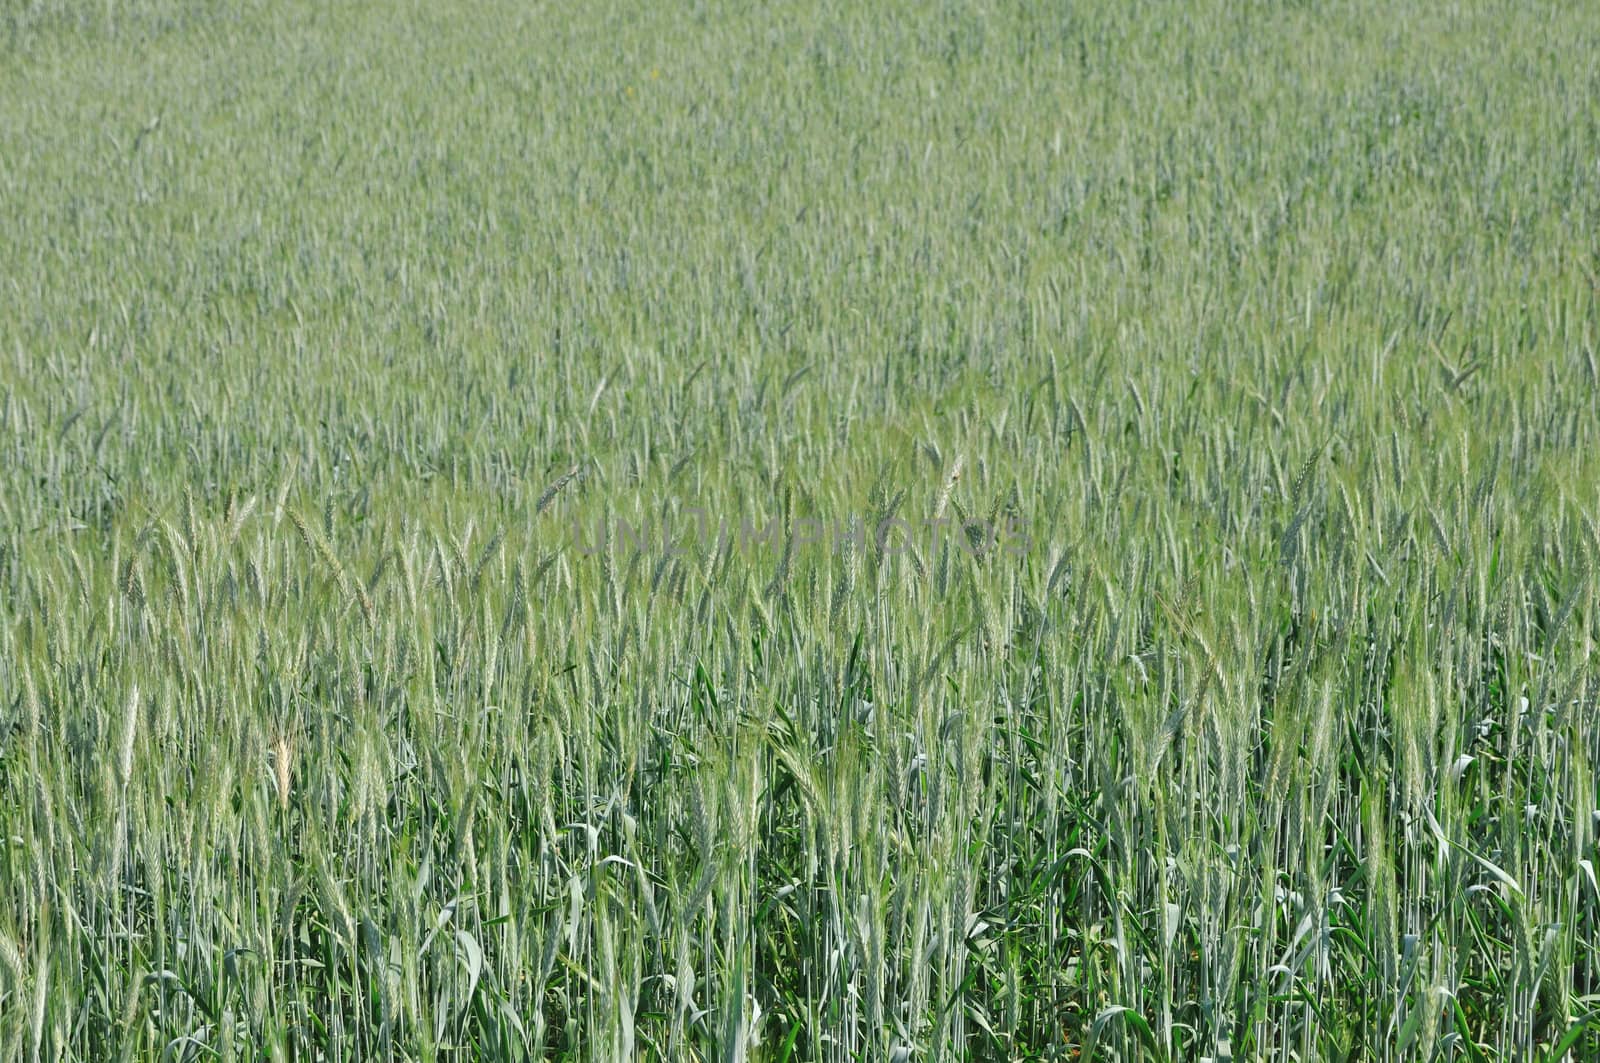 Background of the green cereal in field